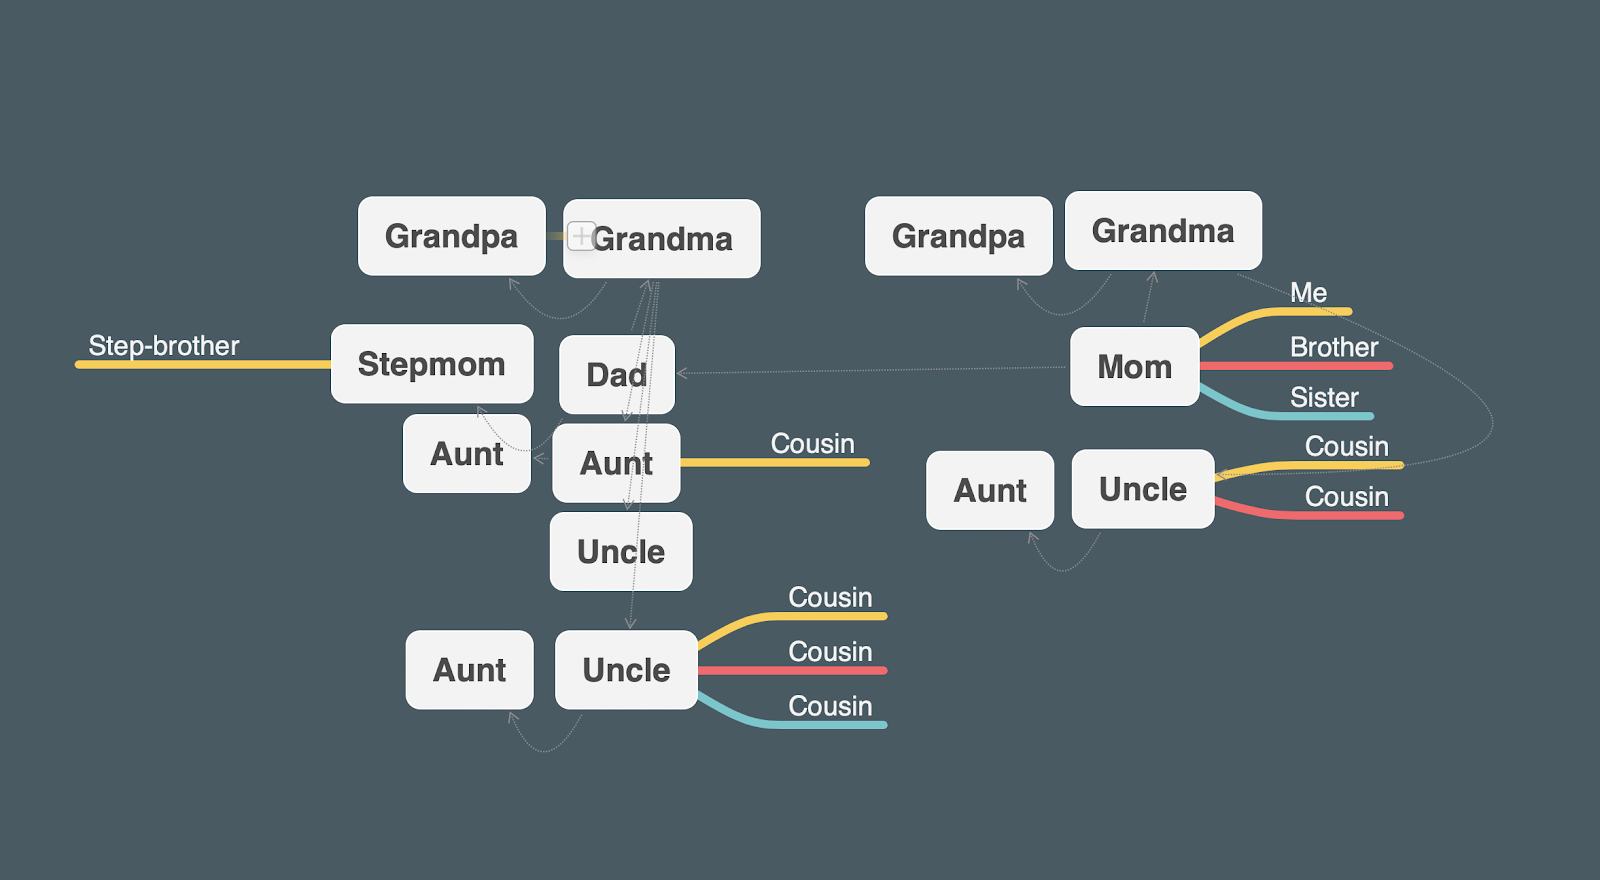 Family tree in MindNode